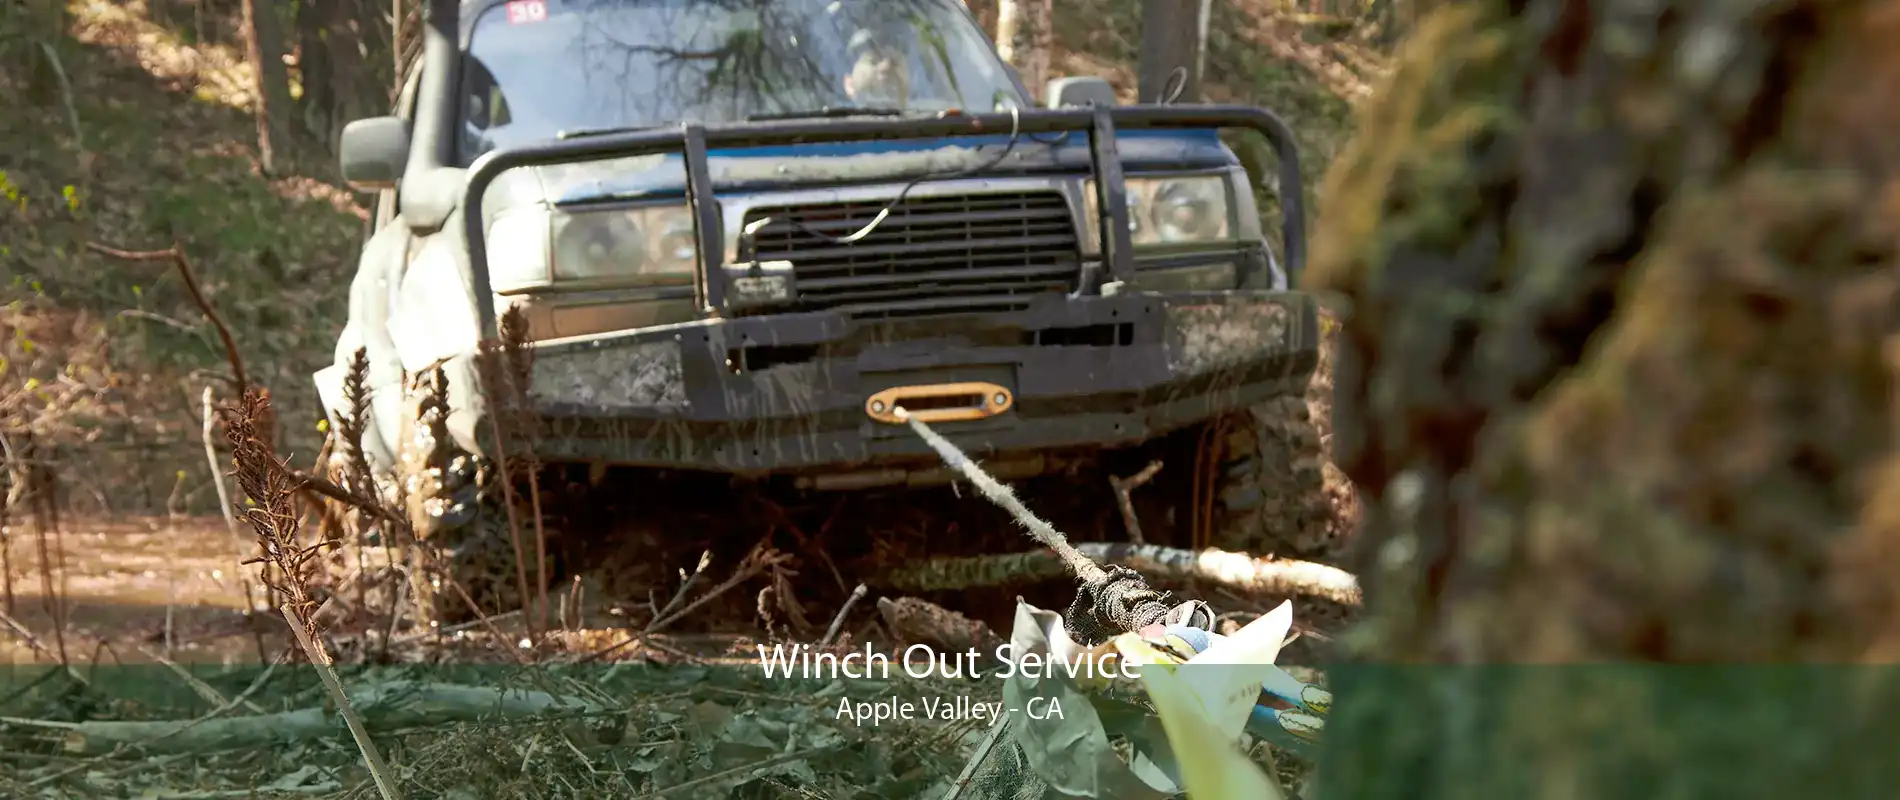 Winch Out Service Apple Valley - CA